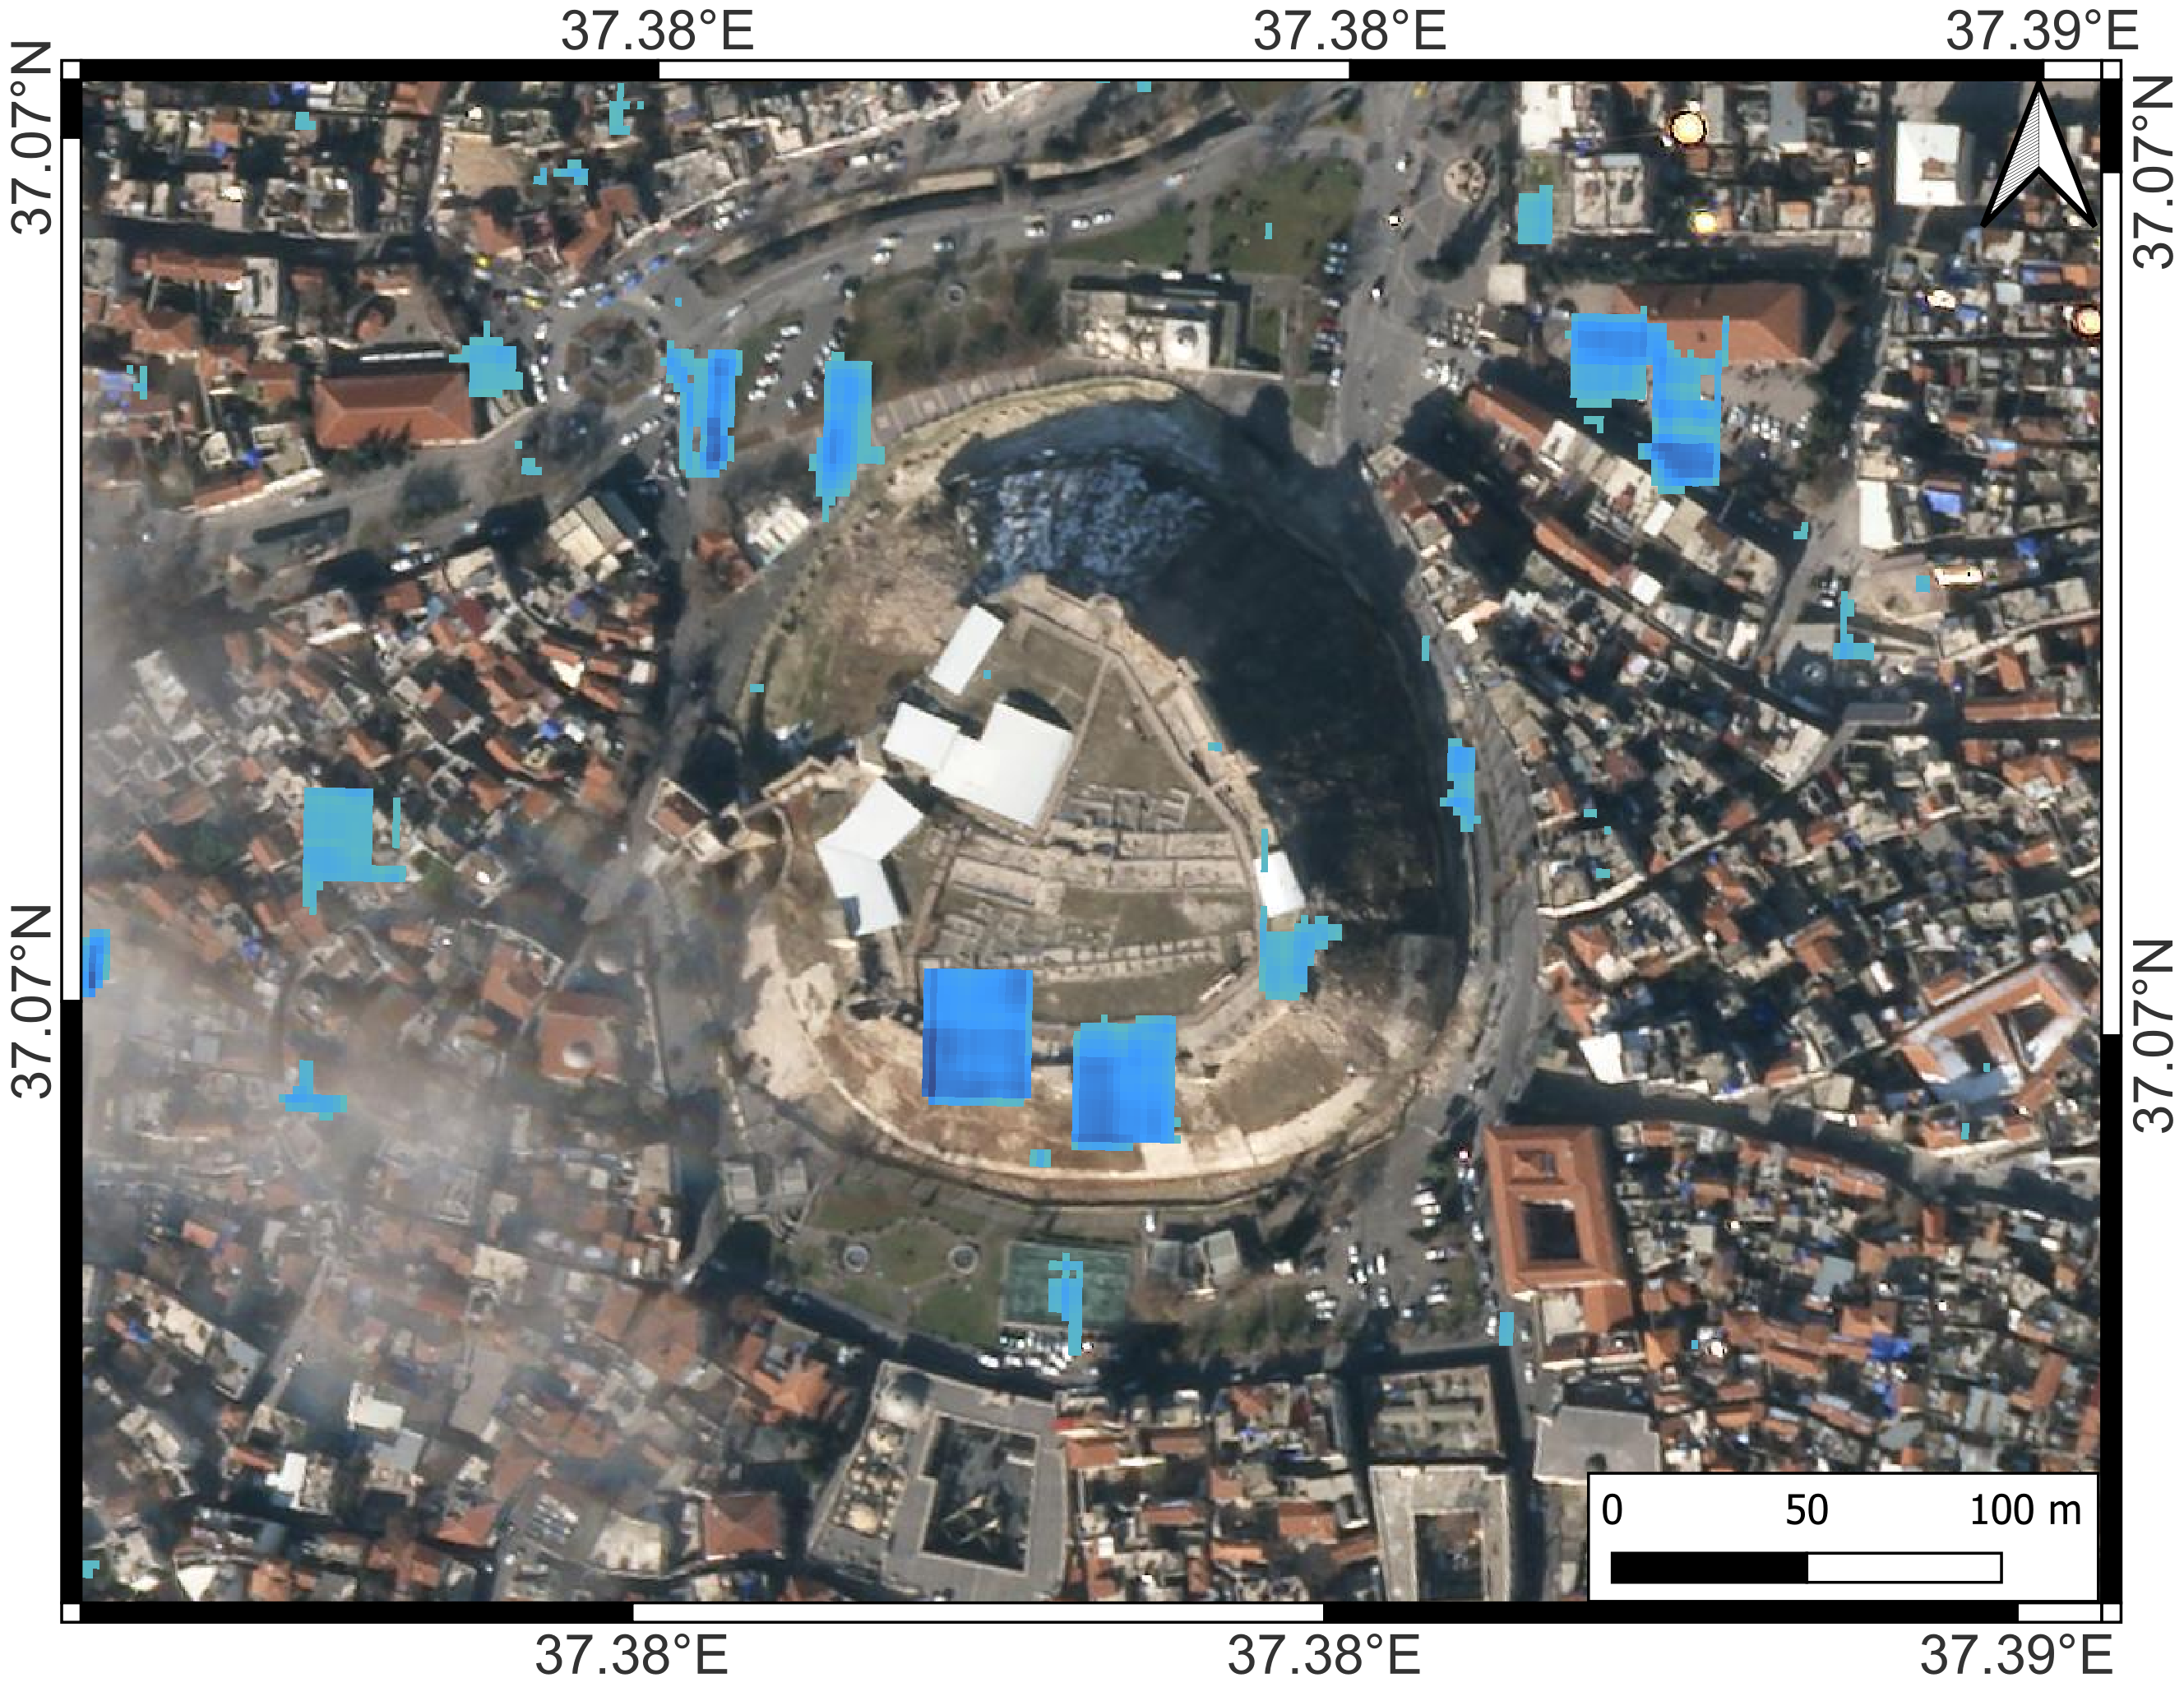 Figure 2 Second image Zoom in on two damaged areas in Gaziantep